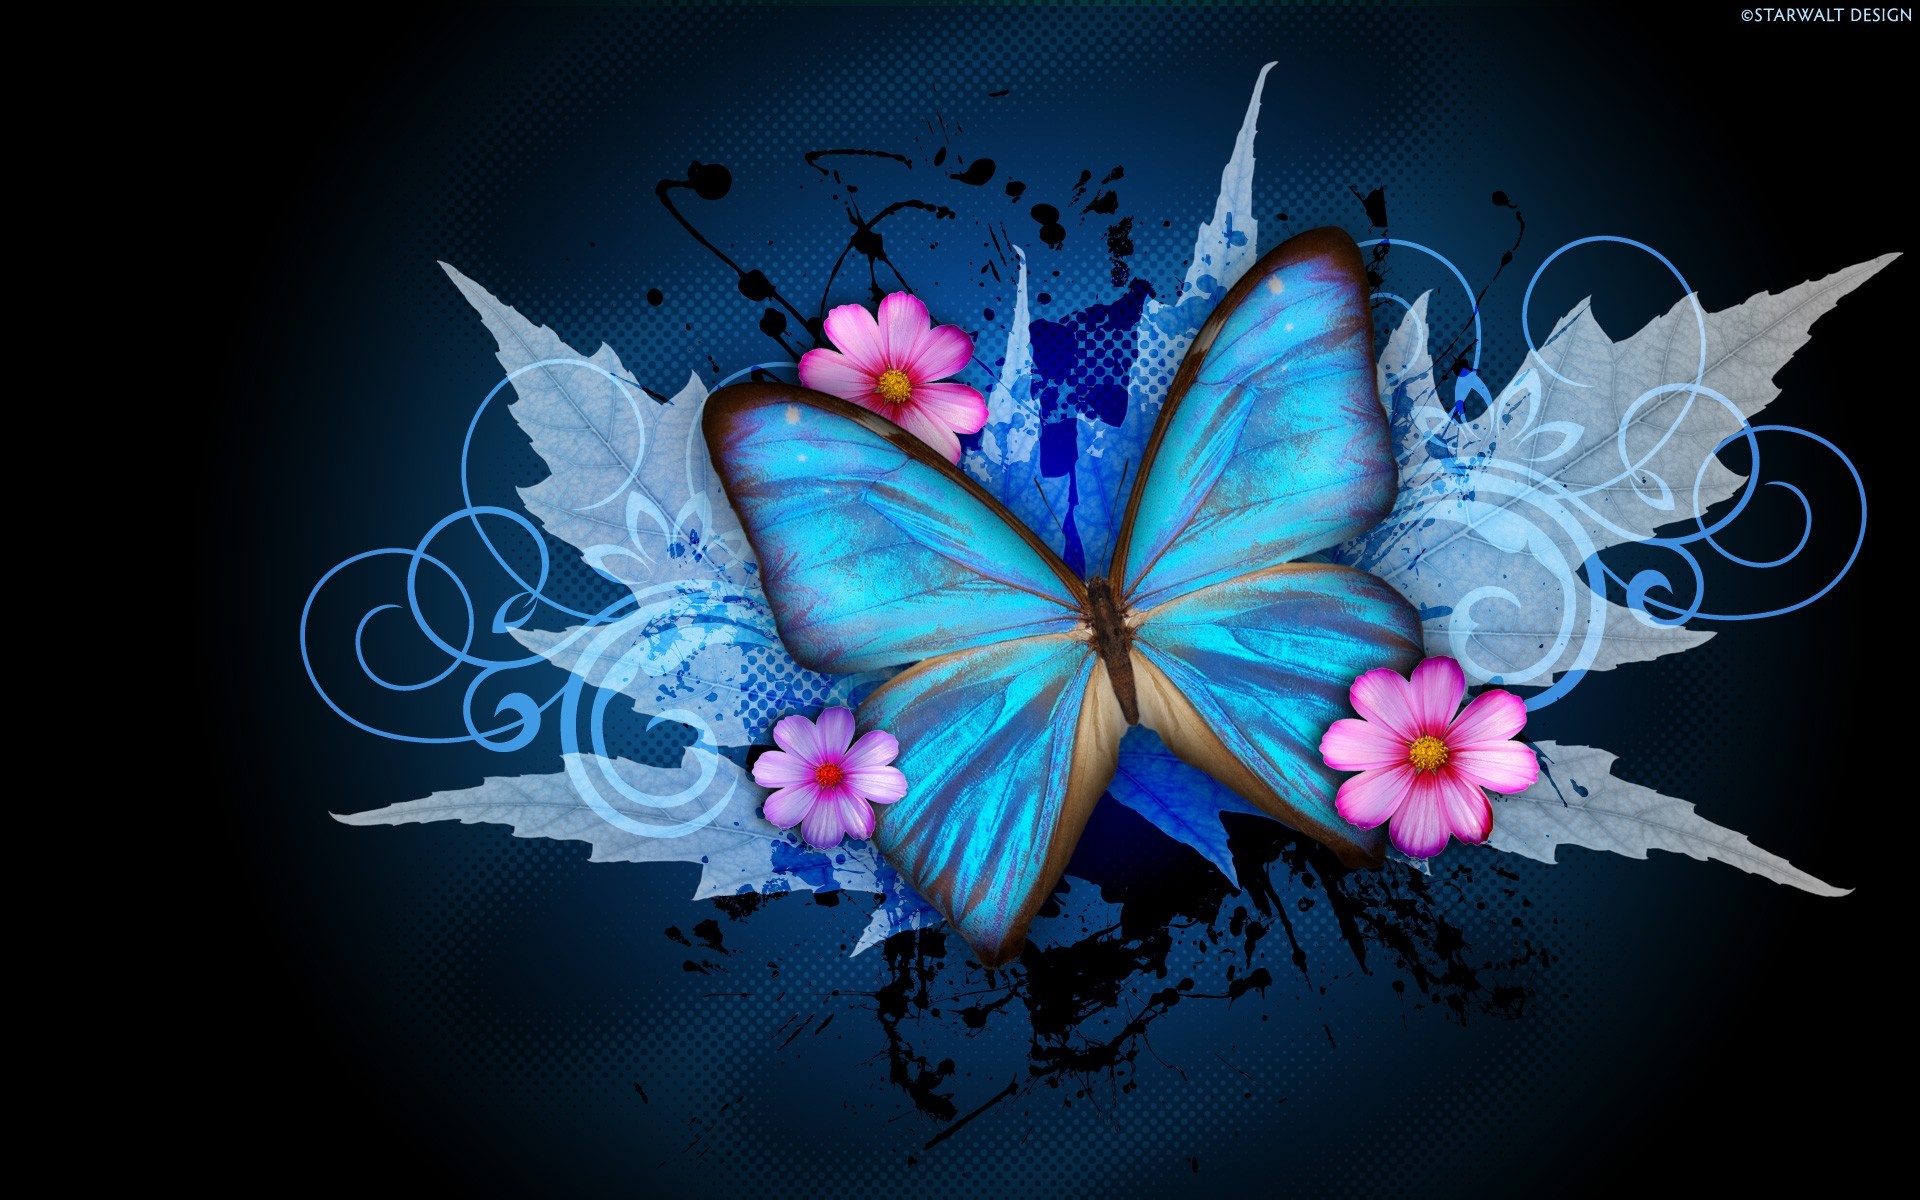 1920x1200 Cool Butterfly Wallpapers - WallpaperSafari Abstract Butterfly Wings Black  Background Vector Wallpaper At 3d .